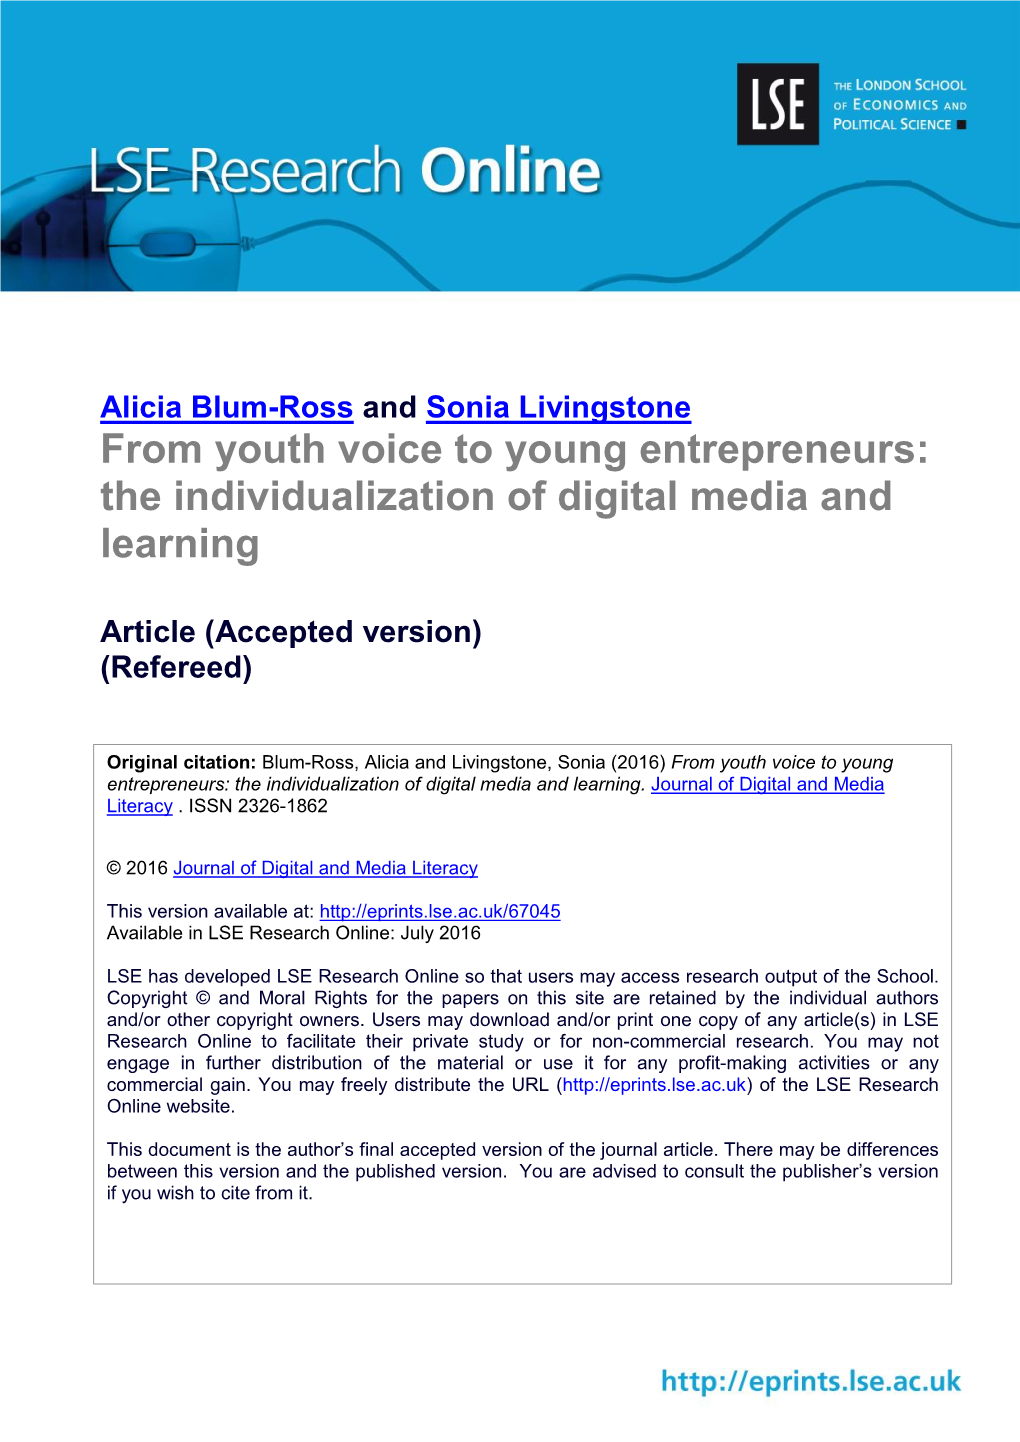 From Youth Voice to Young Entrepreneurs: the Individualization of Digital Media and Learning